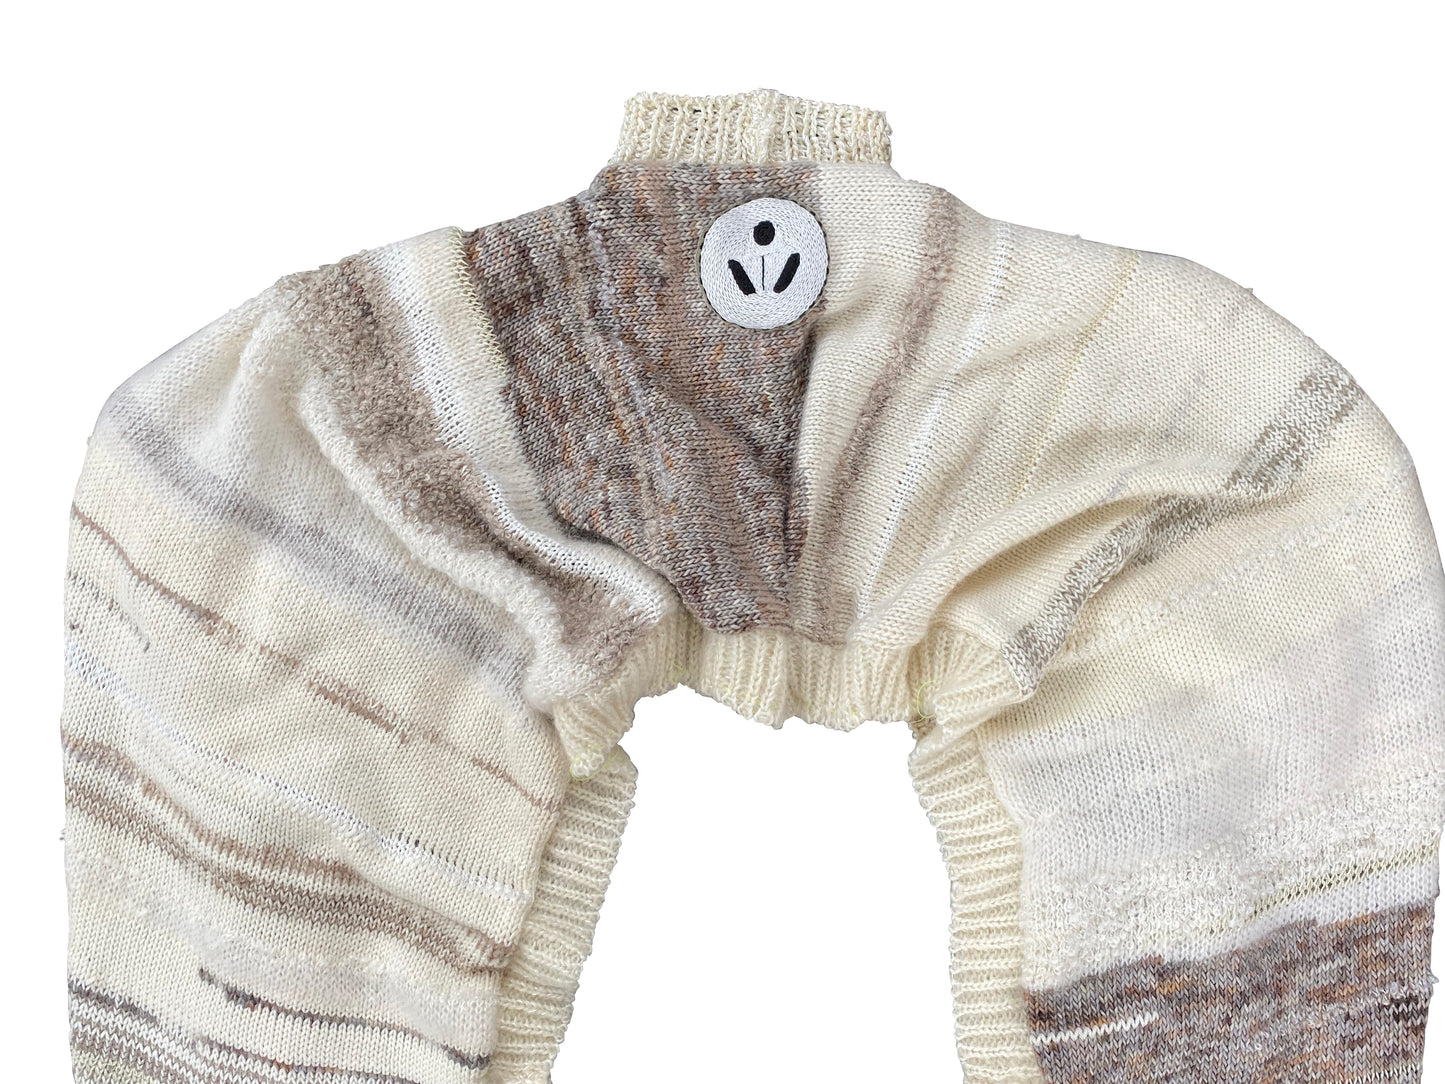 Corbelled Dome Cocoon Artisanal Jersey in Wool, Mohair & Viscose